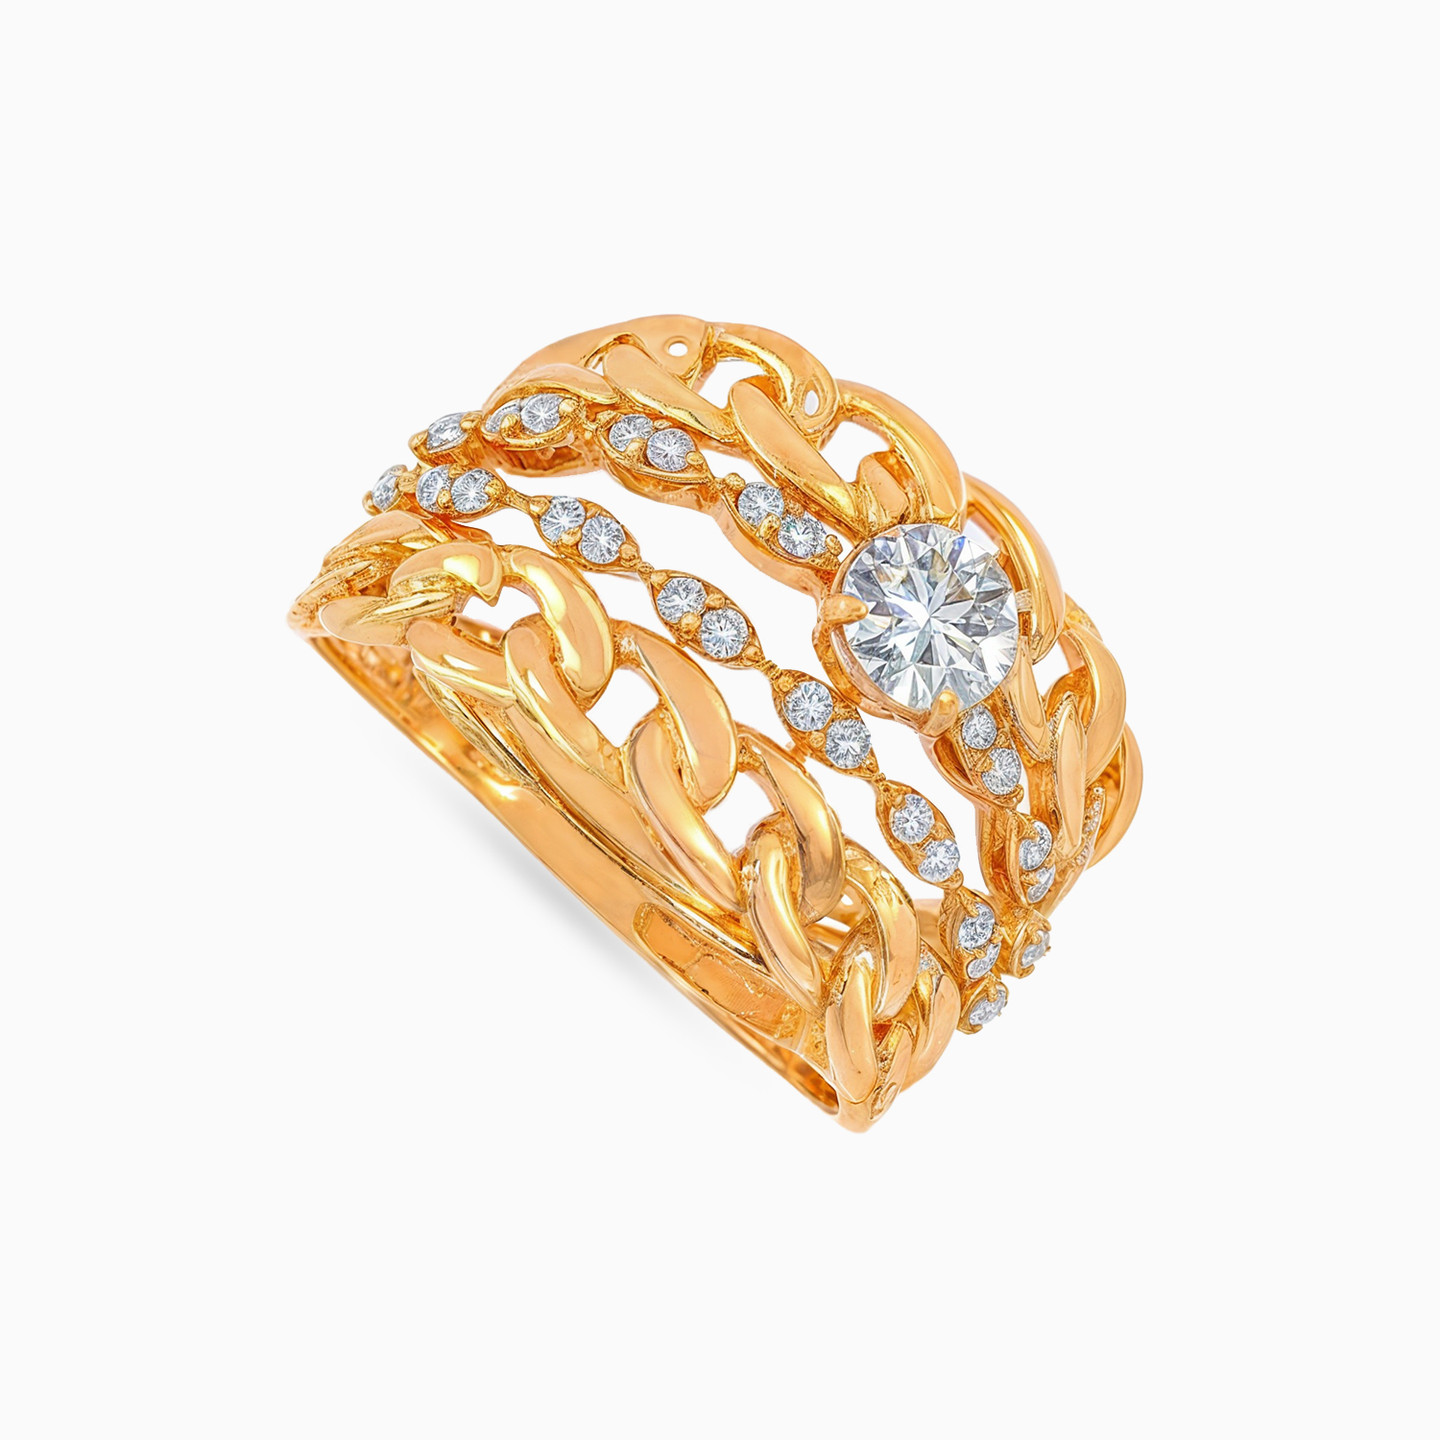 21K Gold Cubic Zirconia Twins Ring - 2